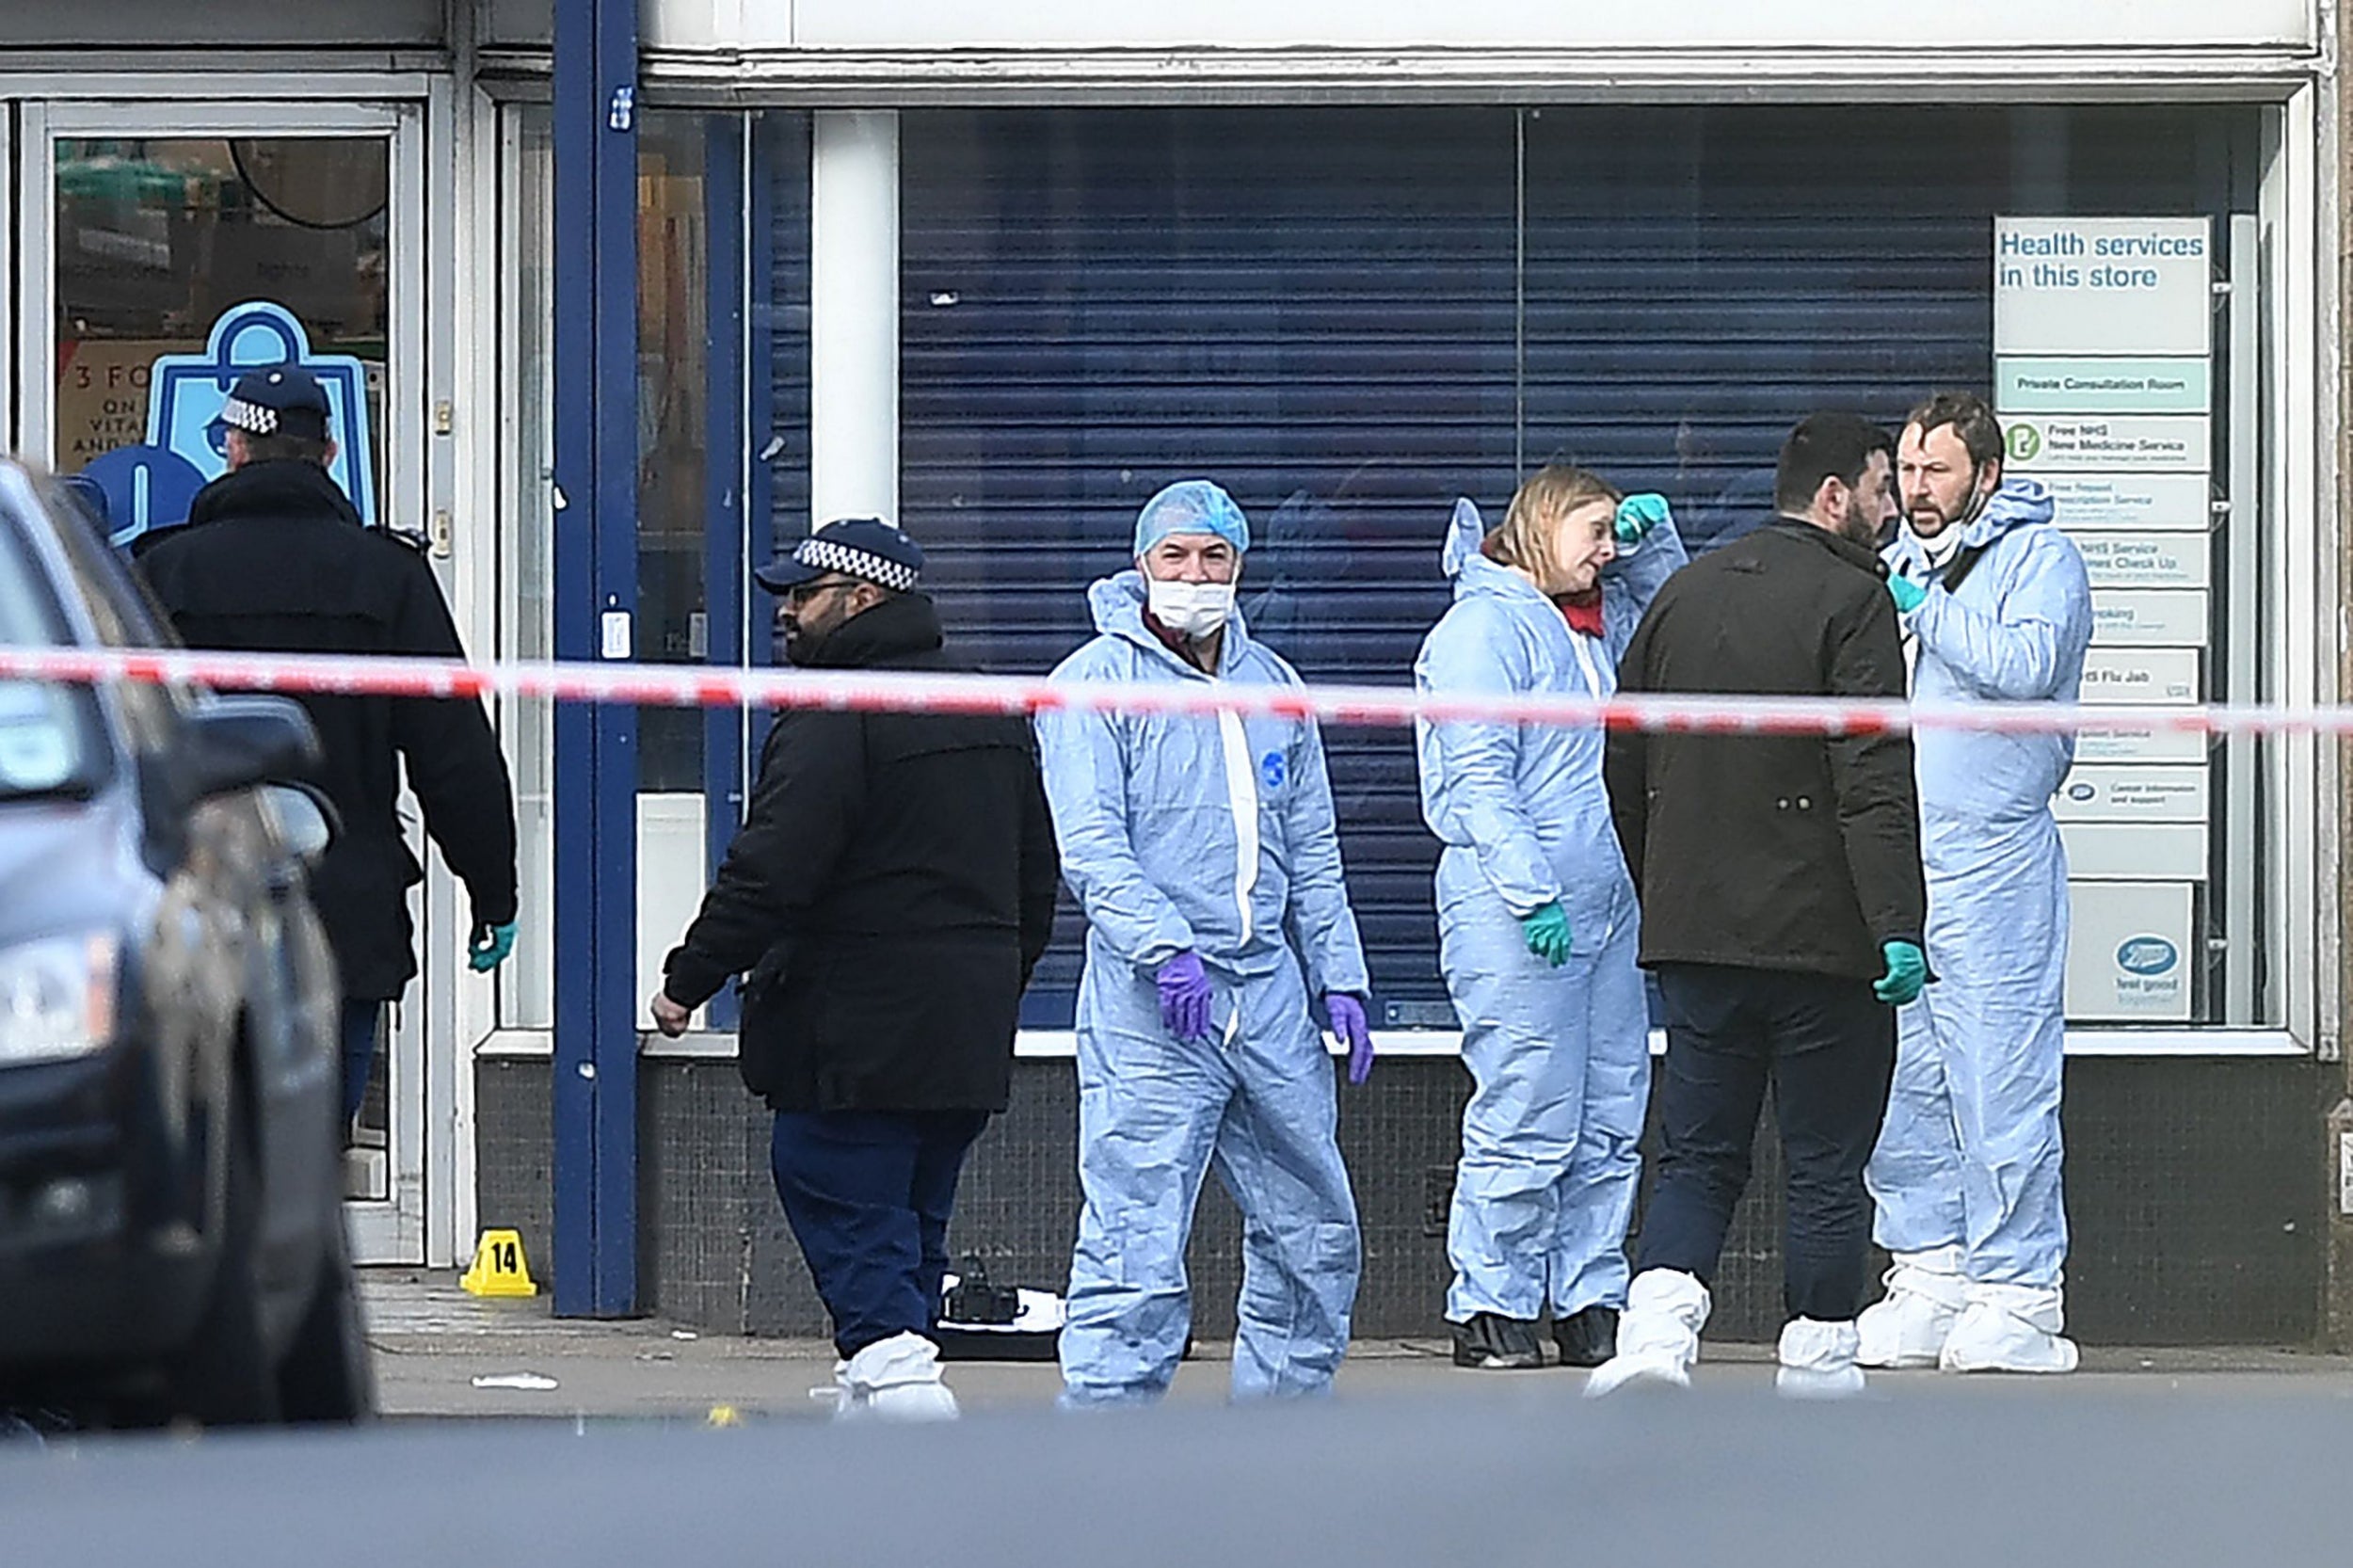 The Streatham stabbing was among four consecutive terror attacks launched by serving or former prisoners in the UK